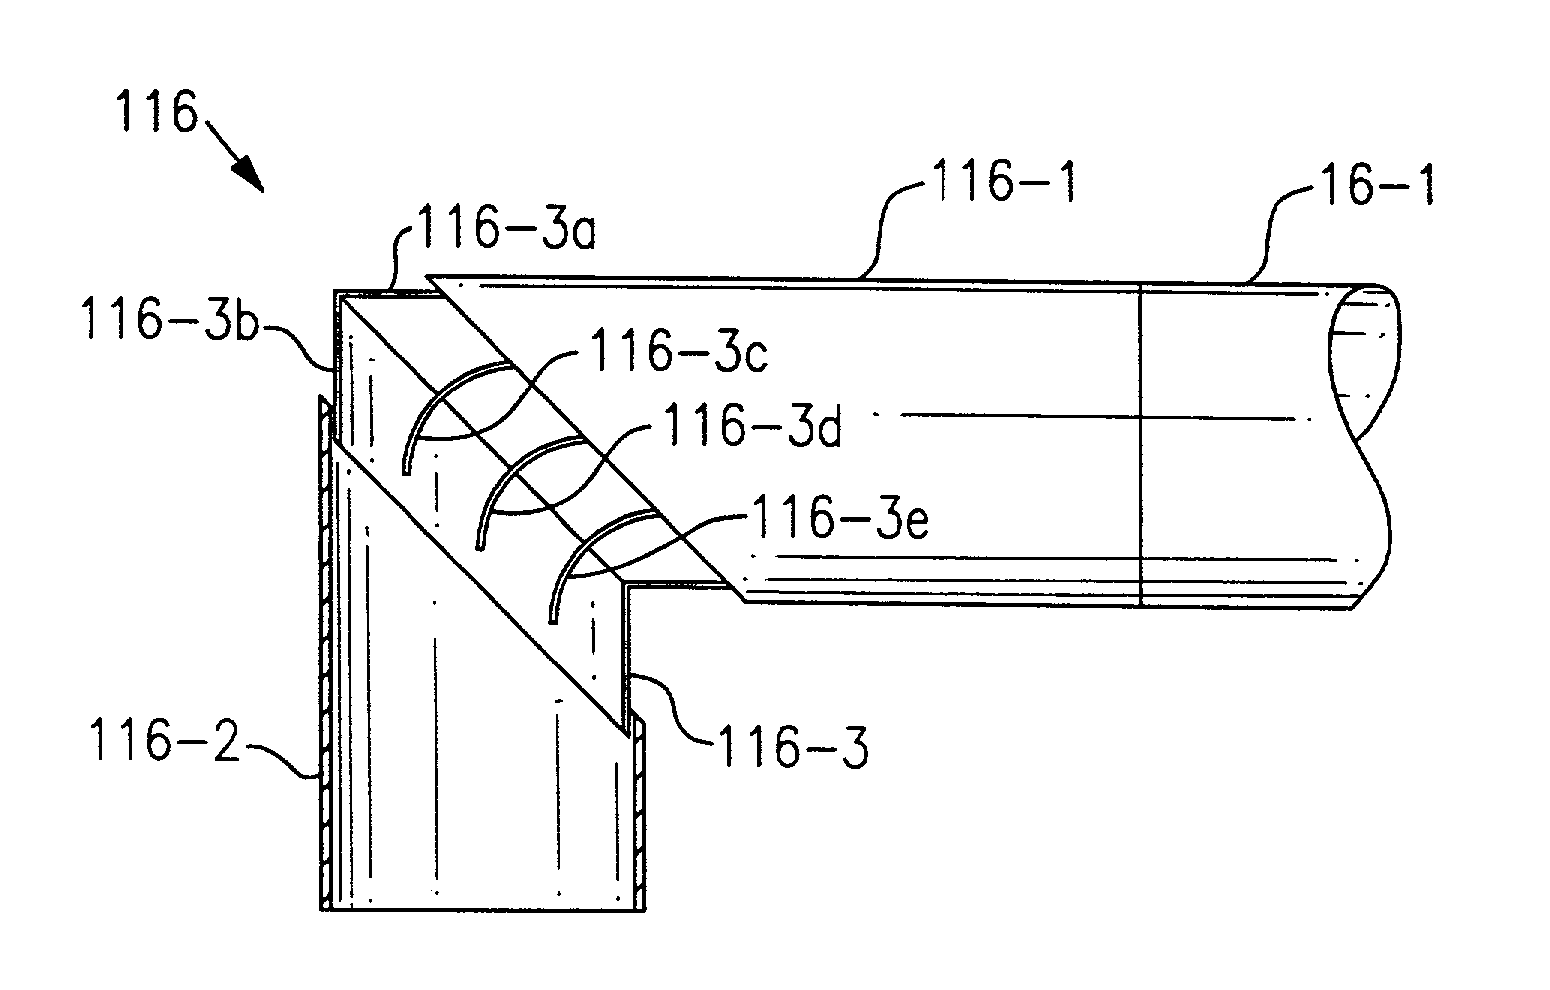 Chiller compressor circuit containing turning vanes